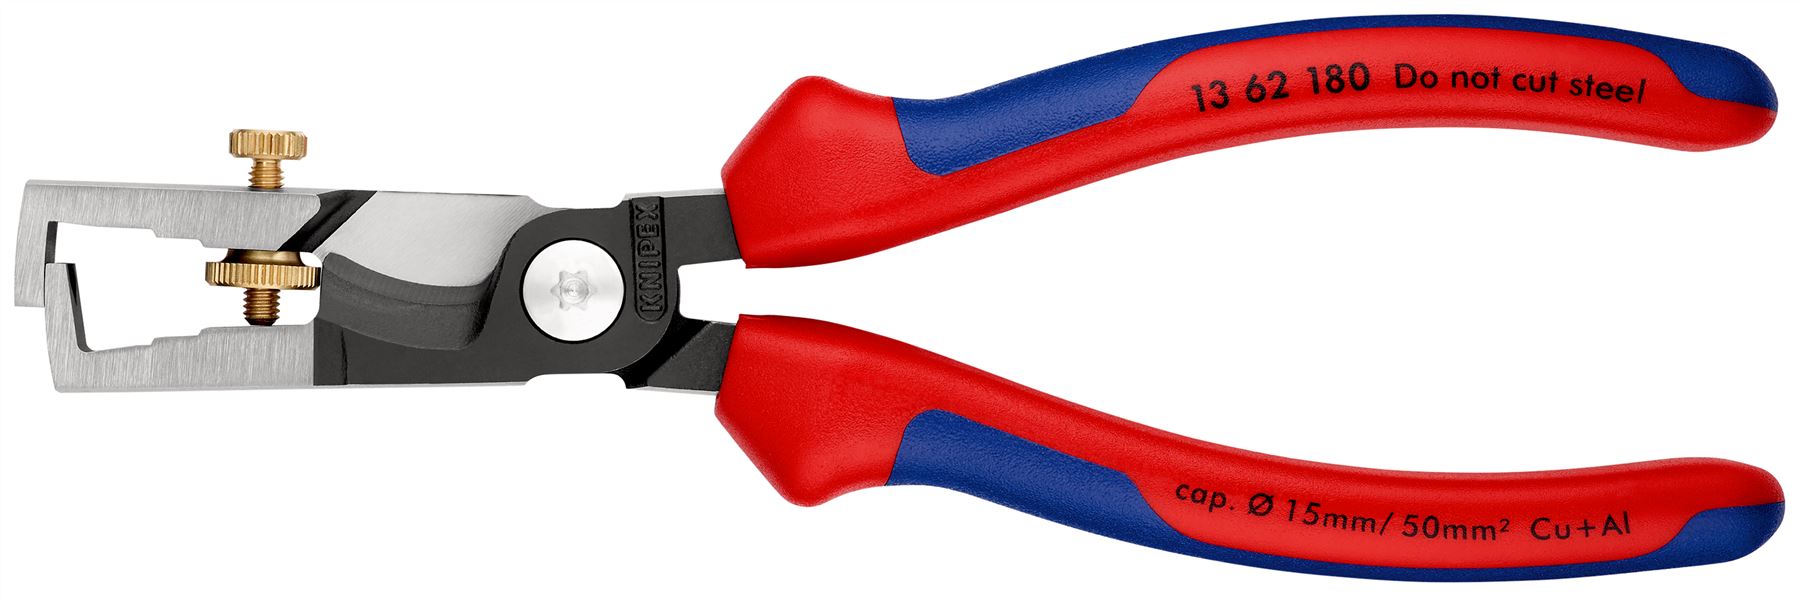 Knipex StriX Insulation Wire Stippiers with Cable Shears 180mm Multi Component Grips 13 62 180